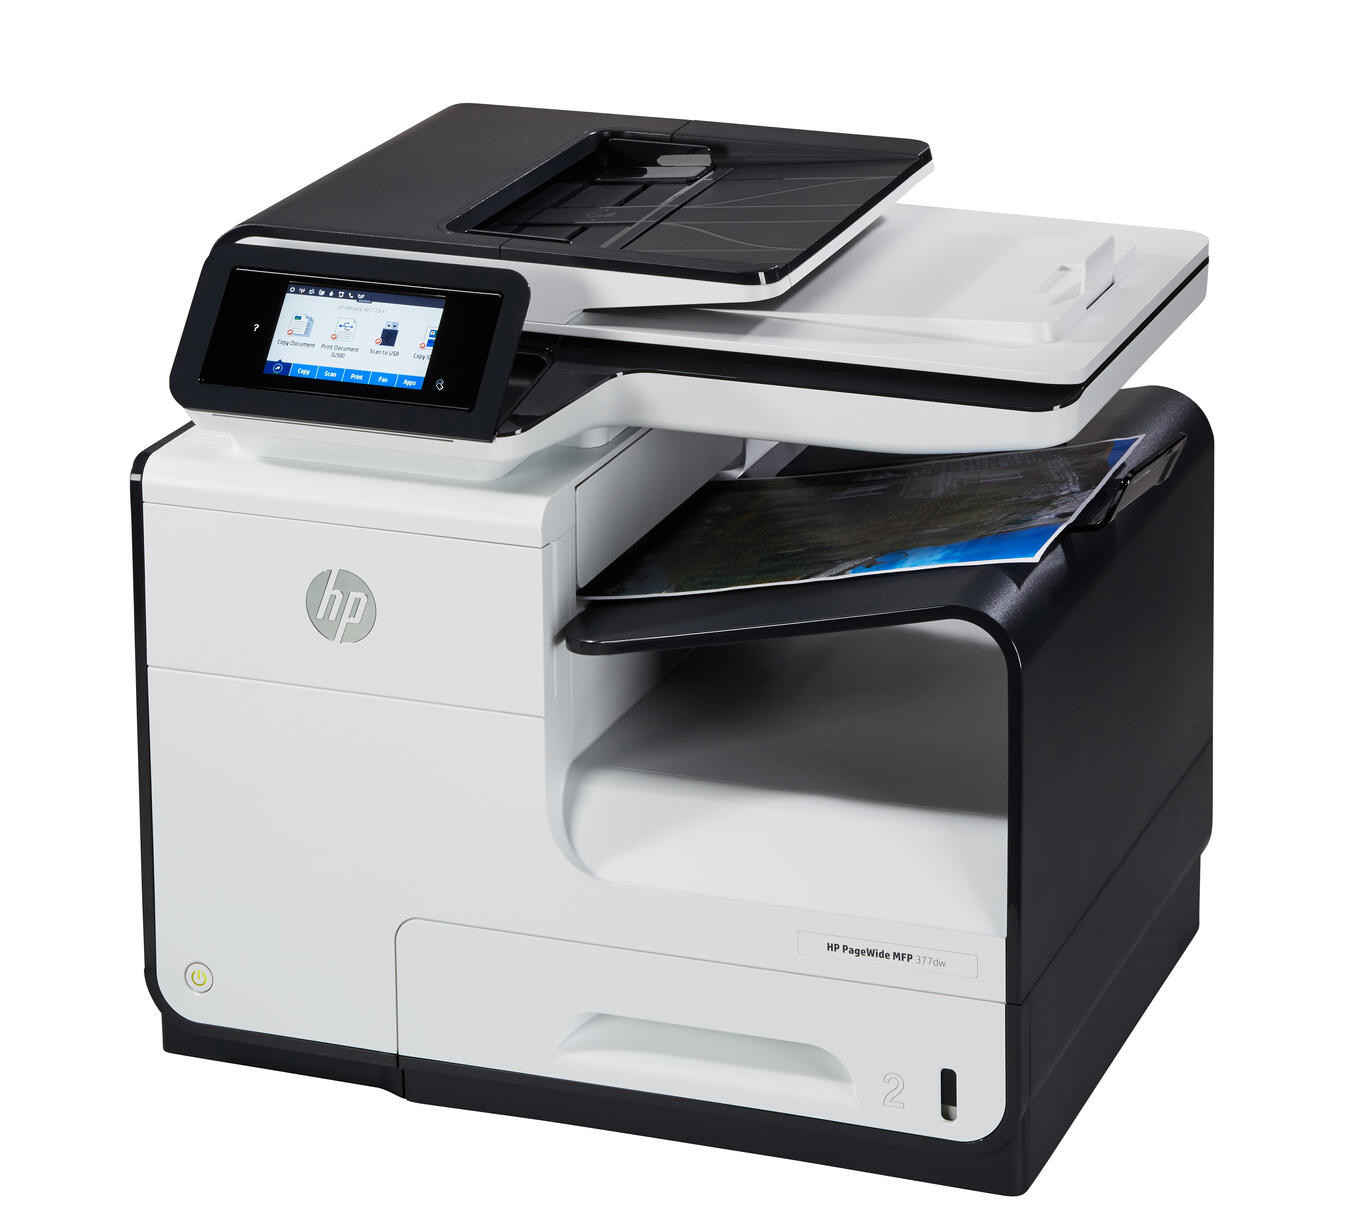 PageWide 377DW HP